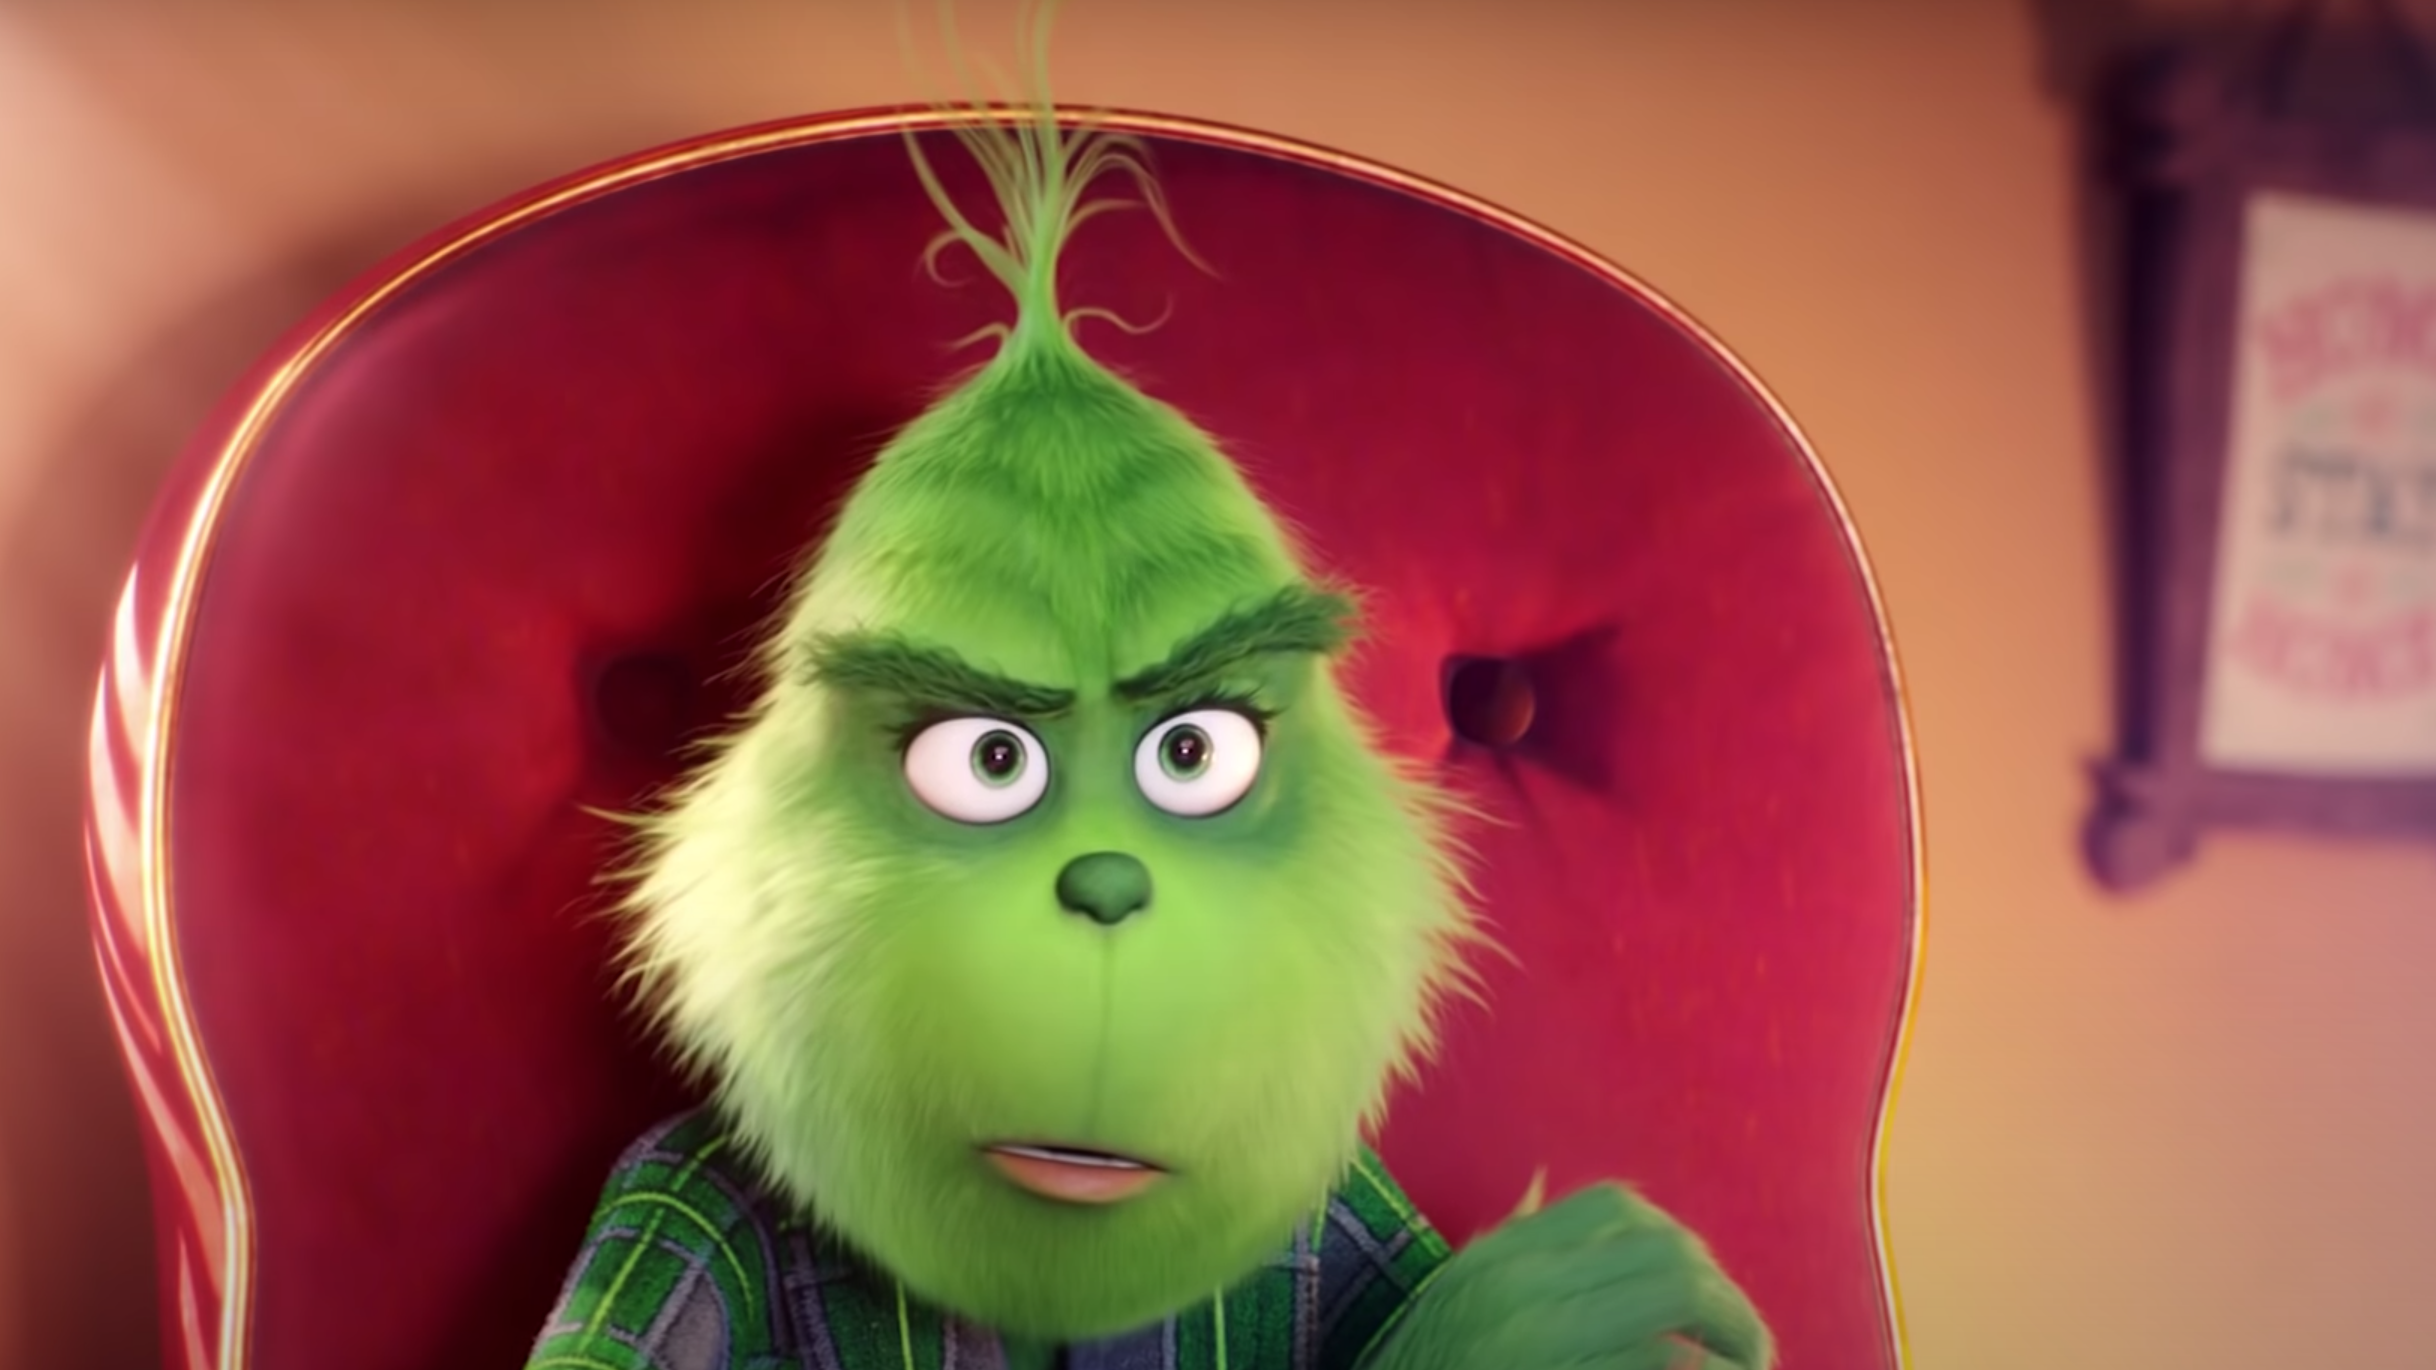 Is 'The Grinch' on Netflix? - How to Watch 'The Grinch' 2018 Animated Movie